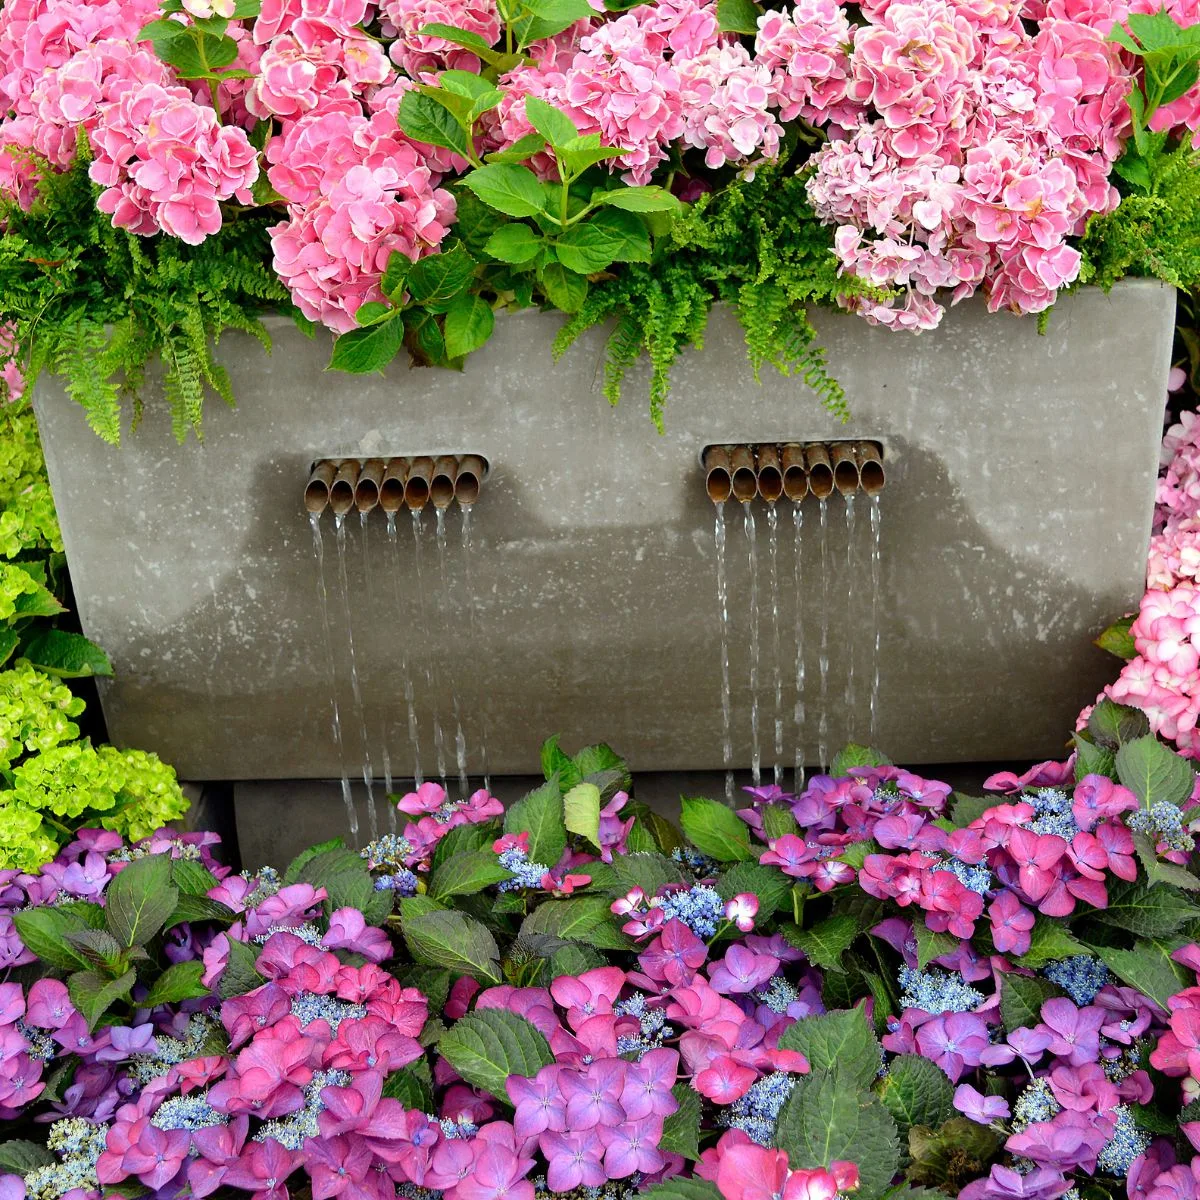 A water feature surrounded by colorful hydrangea flowers.